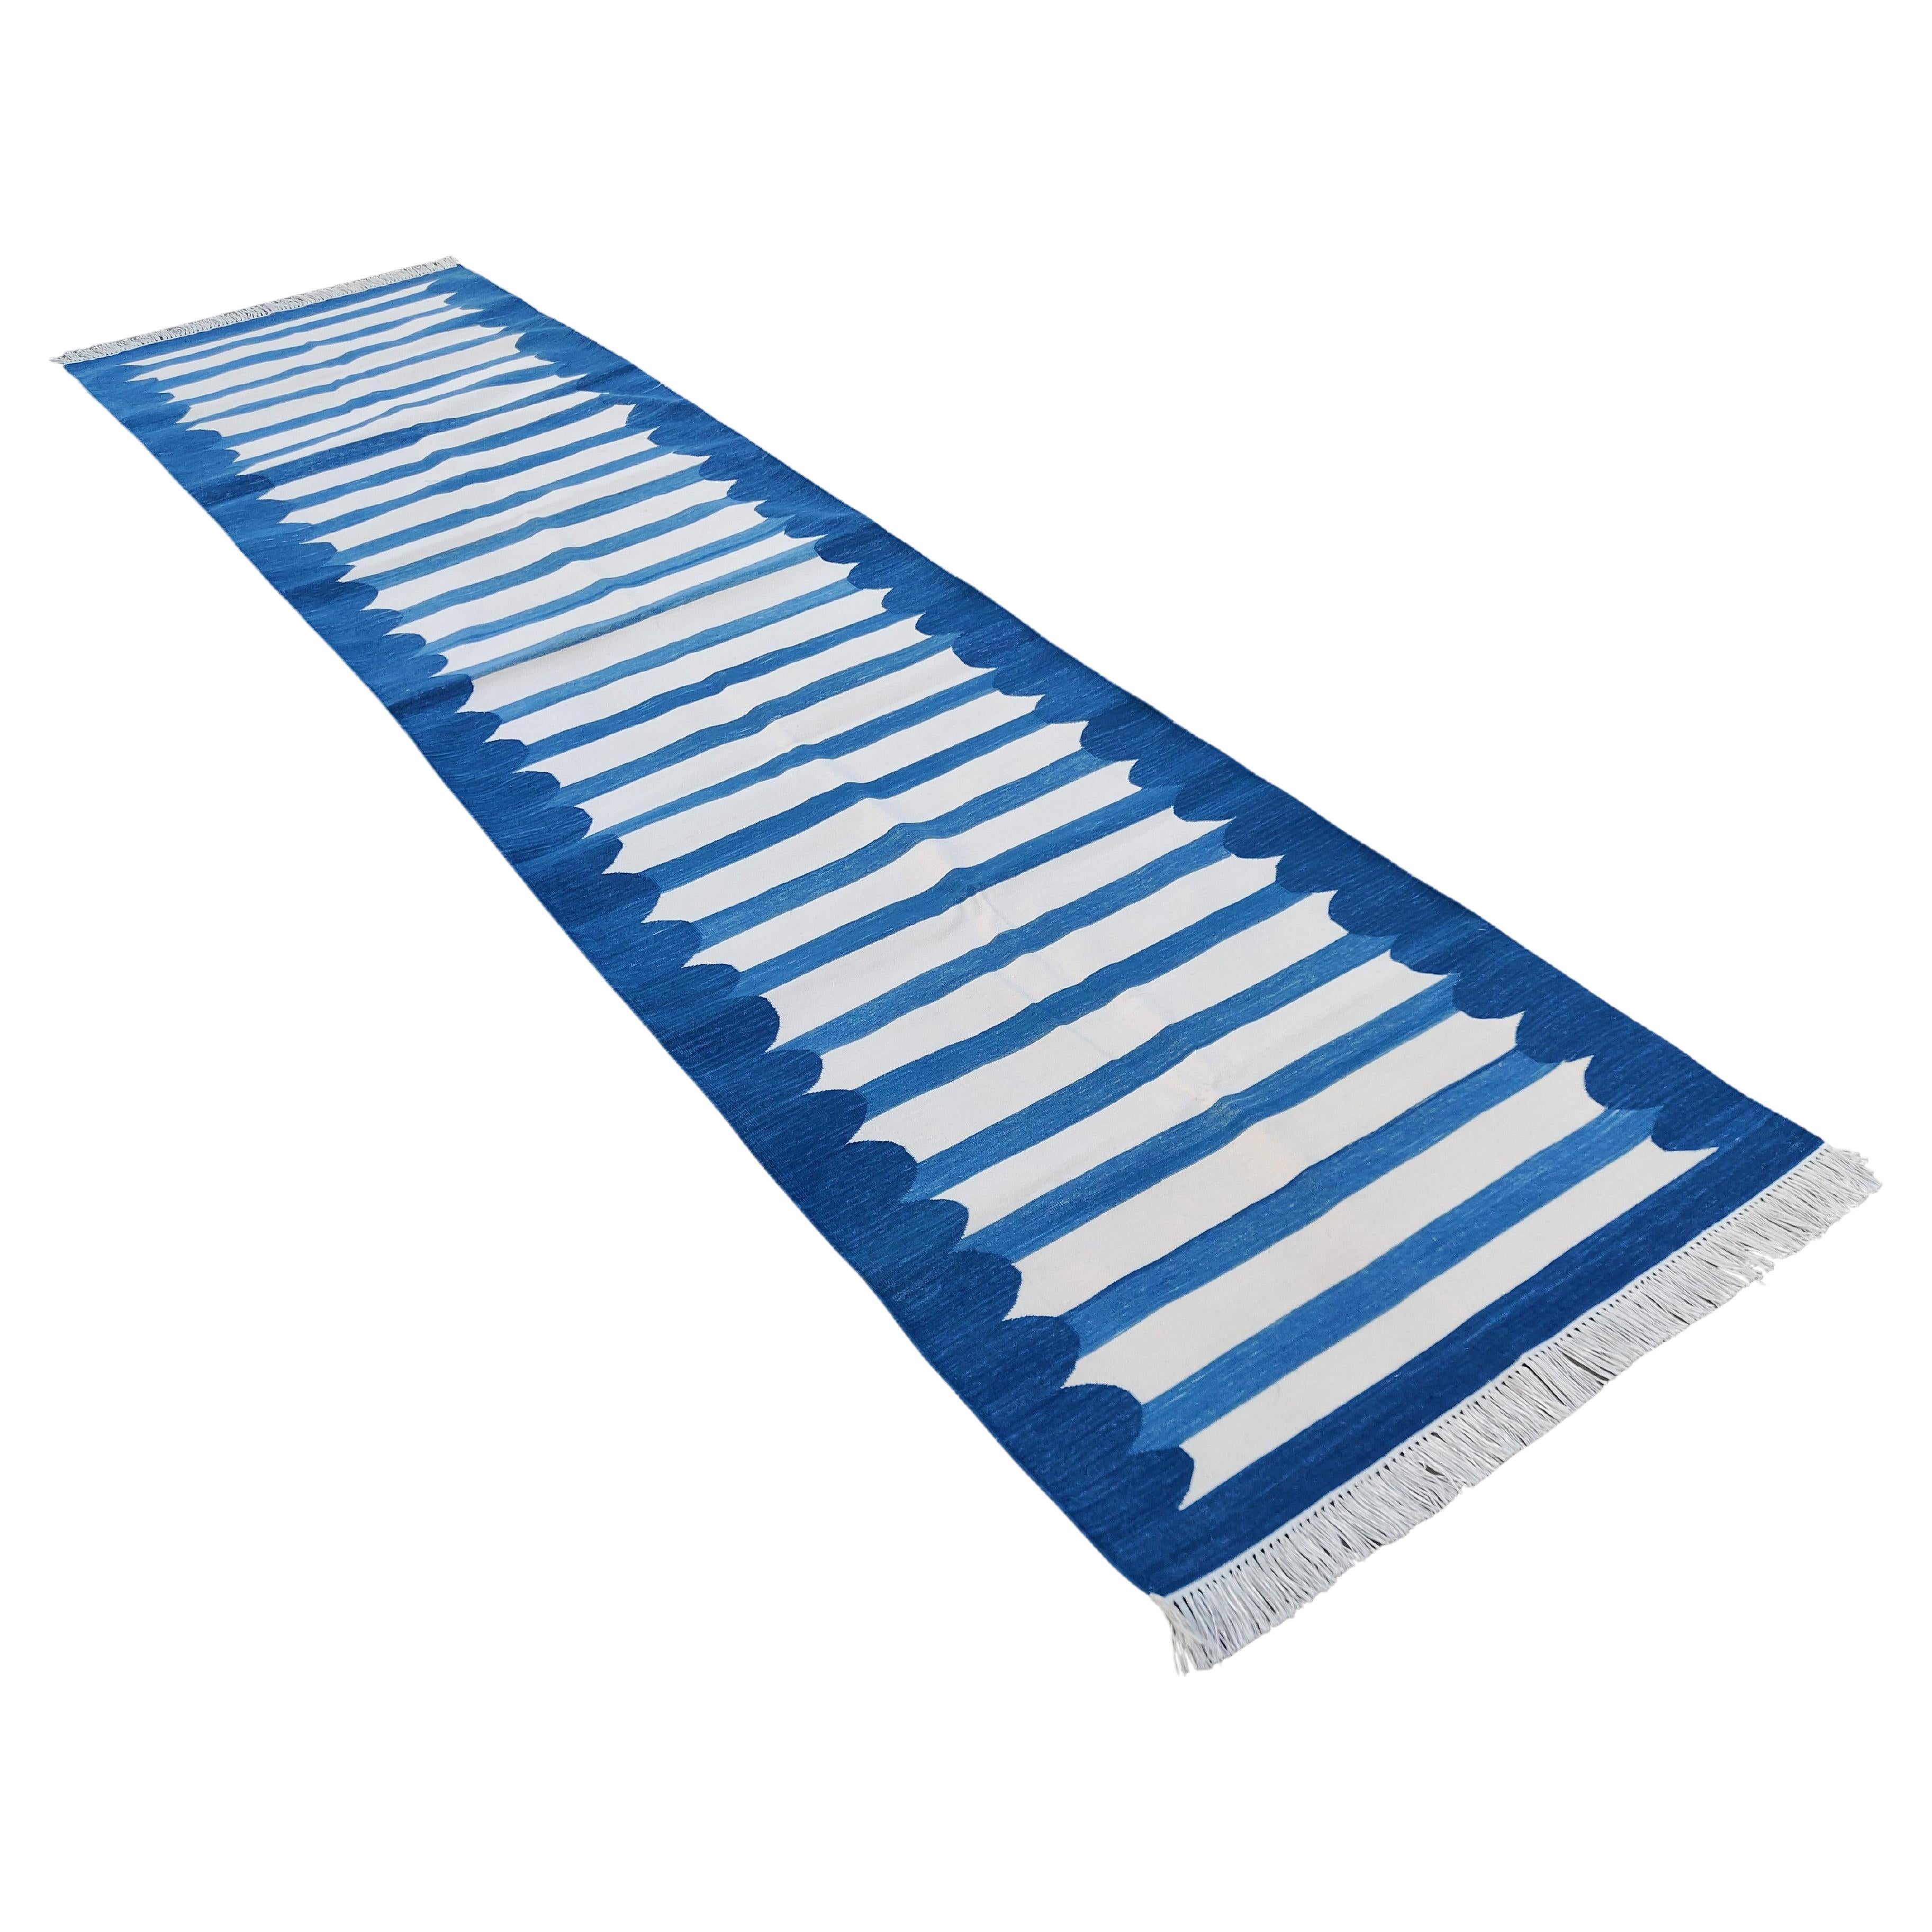 Handmade Cotton Area Flat Weave Runner, 3x12 Blue, White Scallop Indian Dhurrie For Sale